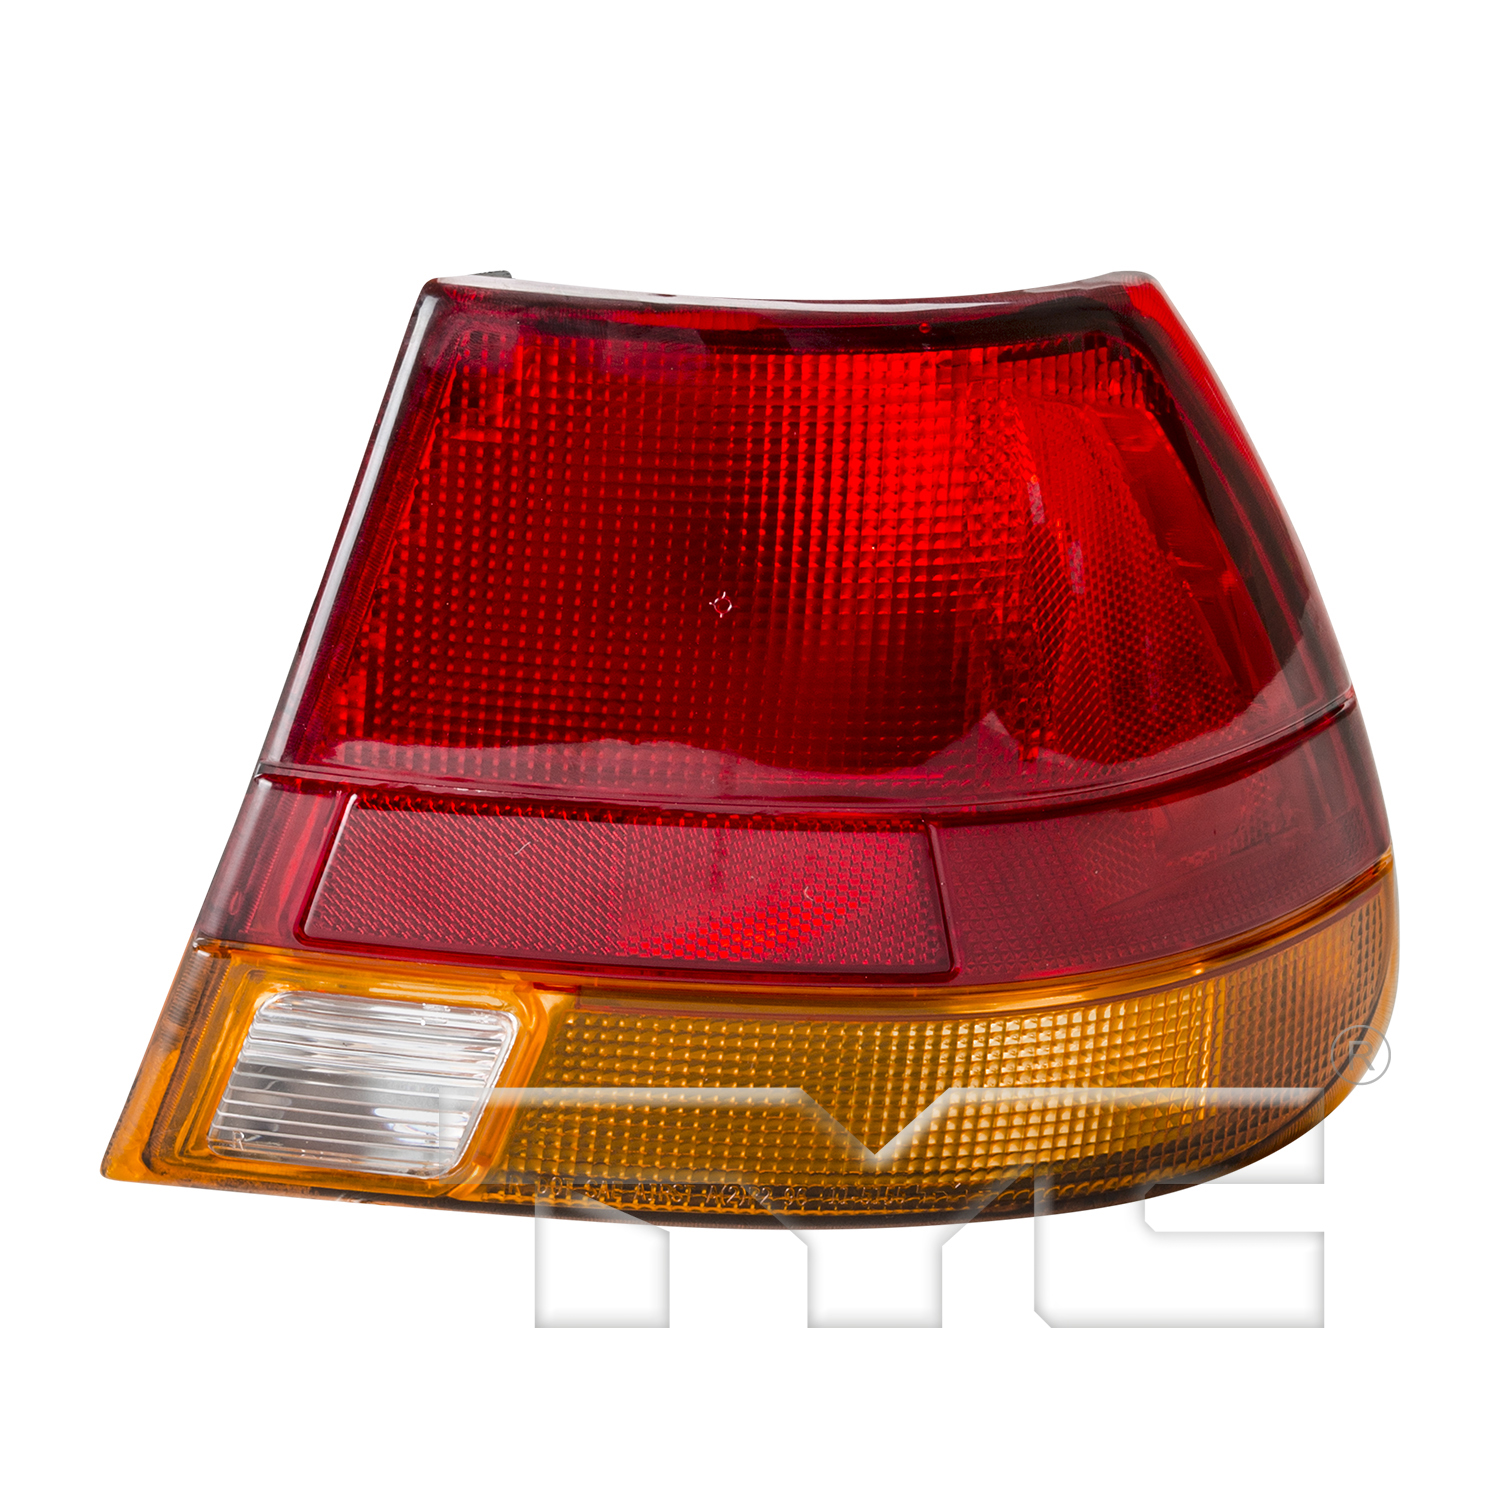 Aftermarket TAILLIGHTS for SATURN - SL2, SL2,97-99,RT Taillamp lens/housing